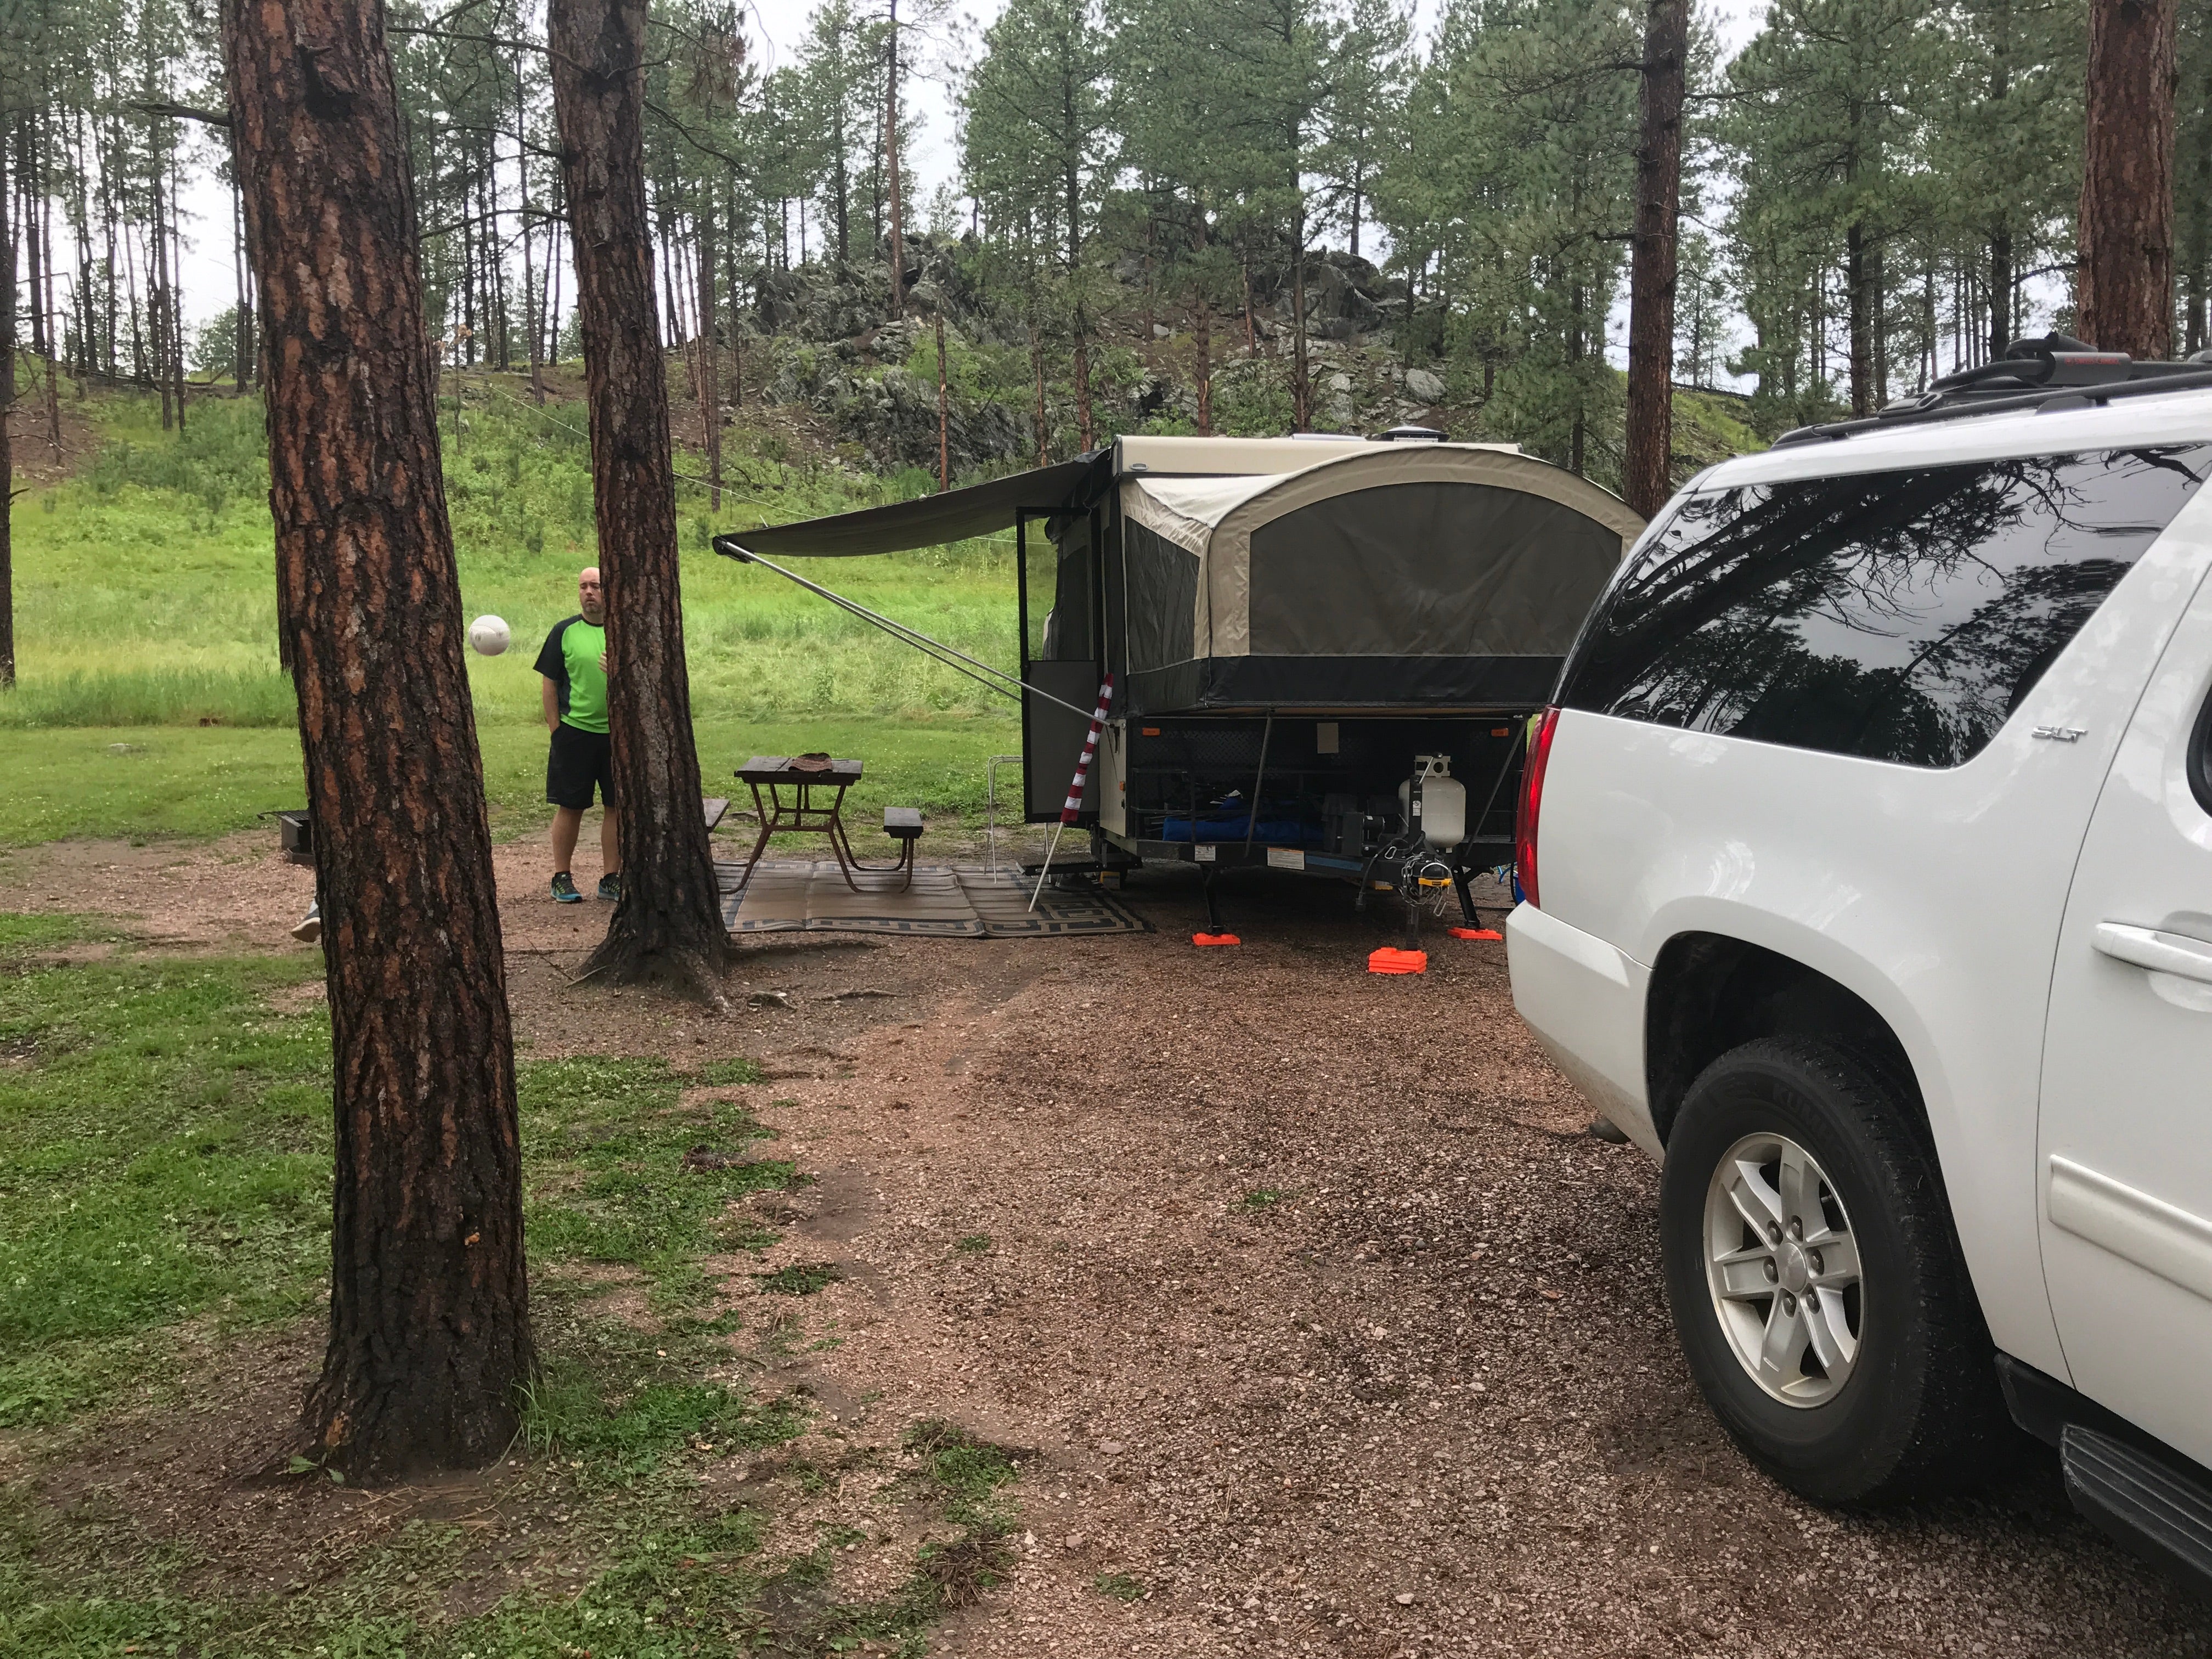 Camper submitted image from Rafter J Bar Ranch - 4